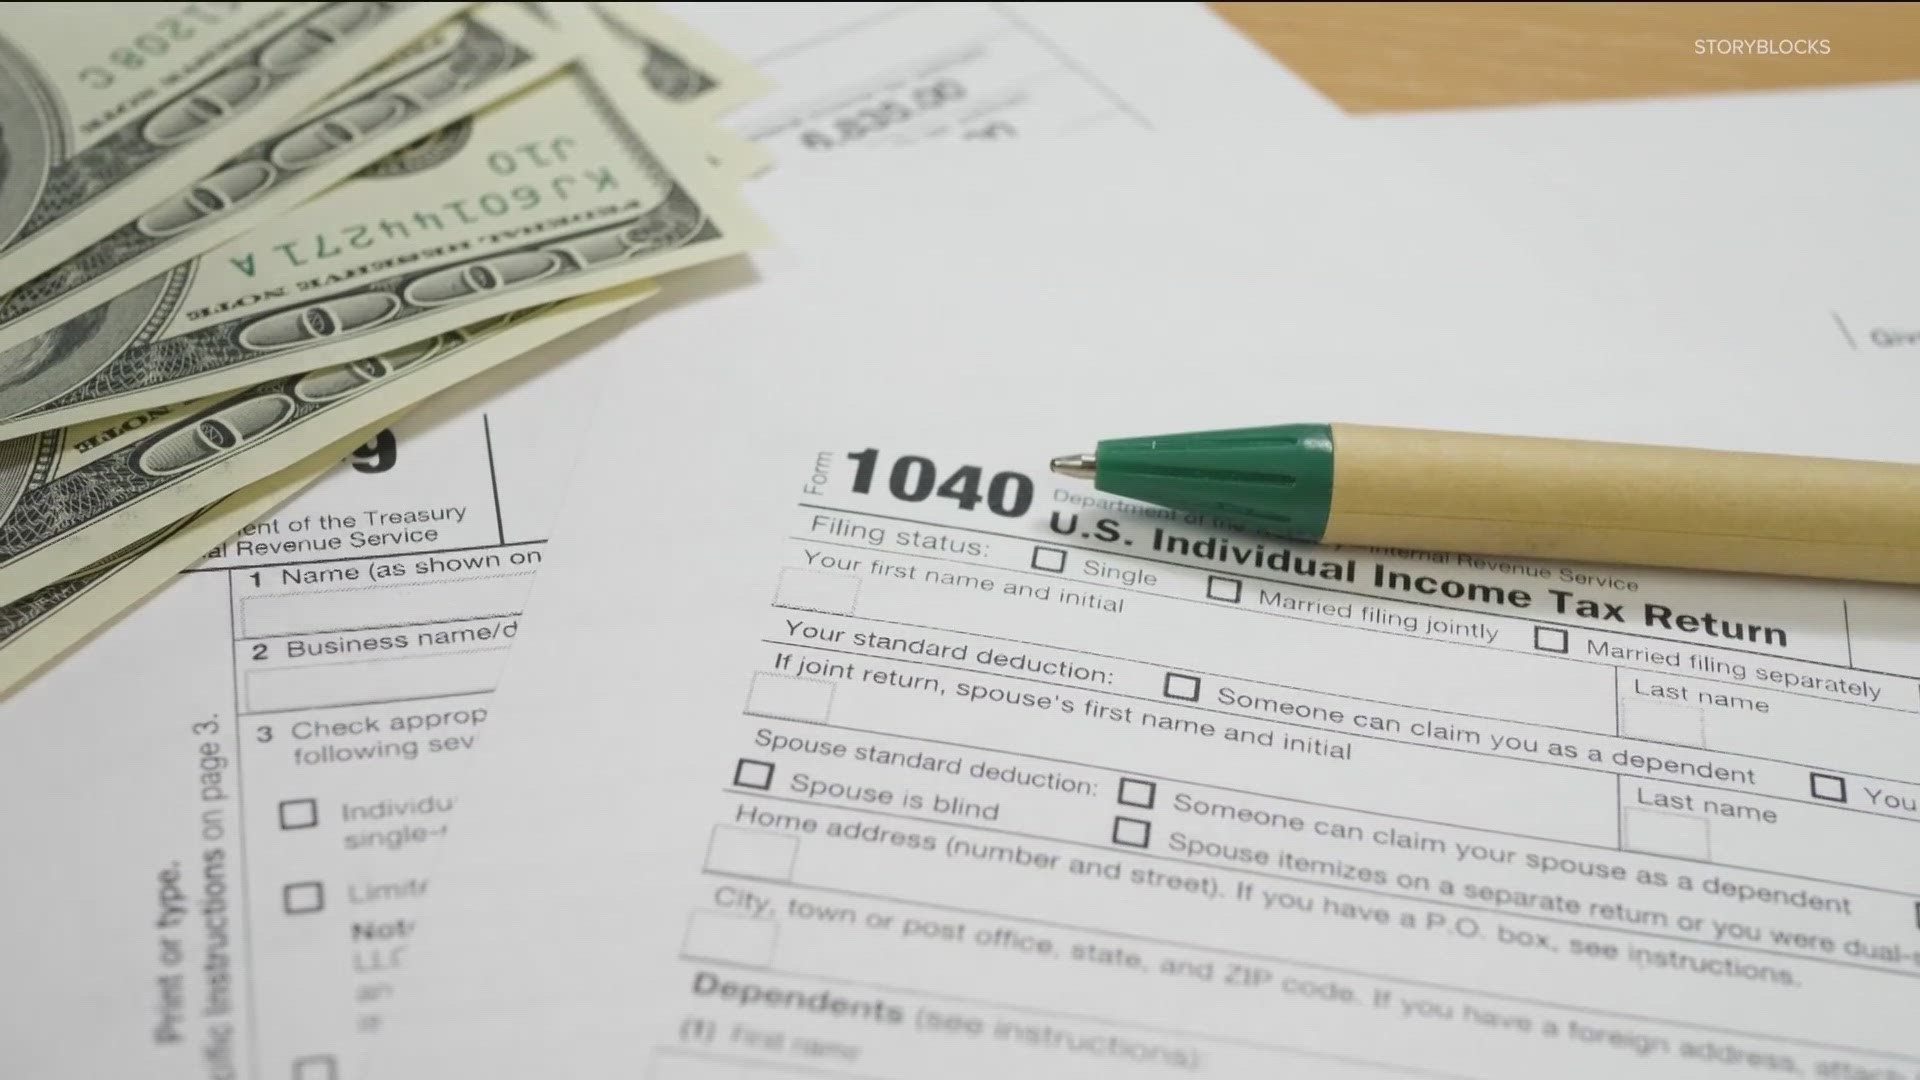 If you need more time to file your taxes, a tax extension won’t increase your risk of being audited, the IRS and two tax professionals told VERIFY.